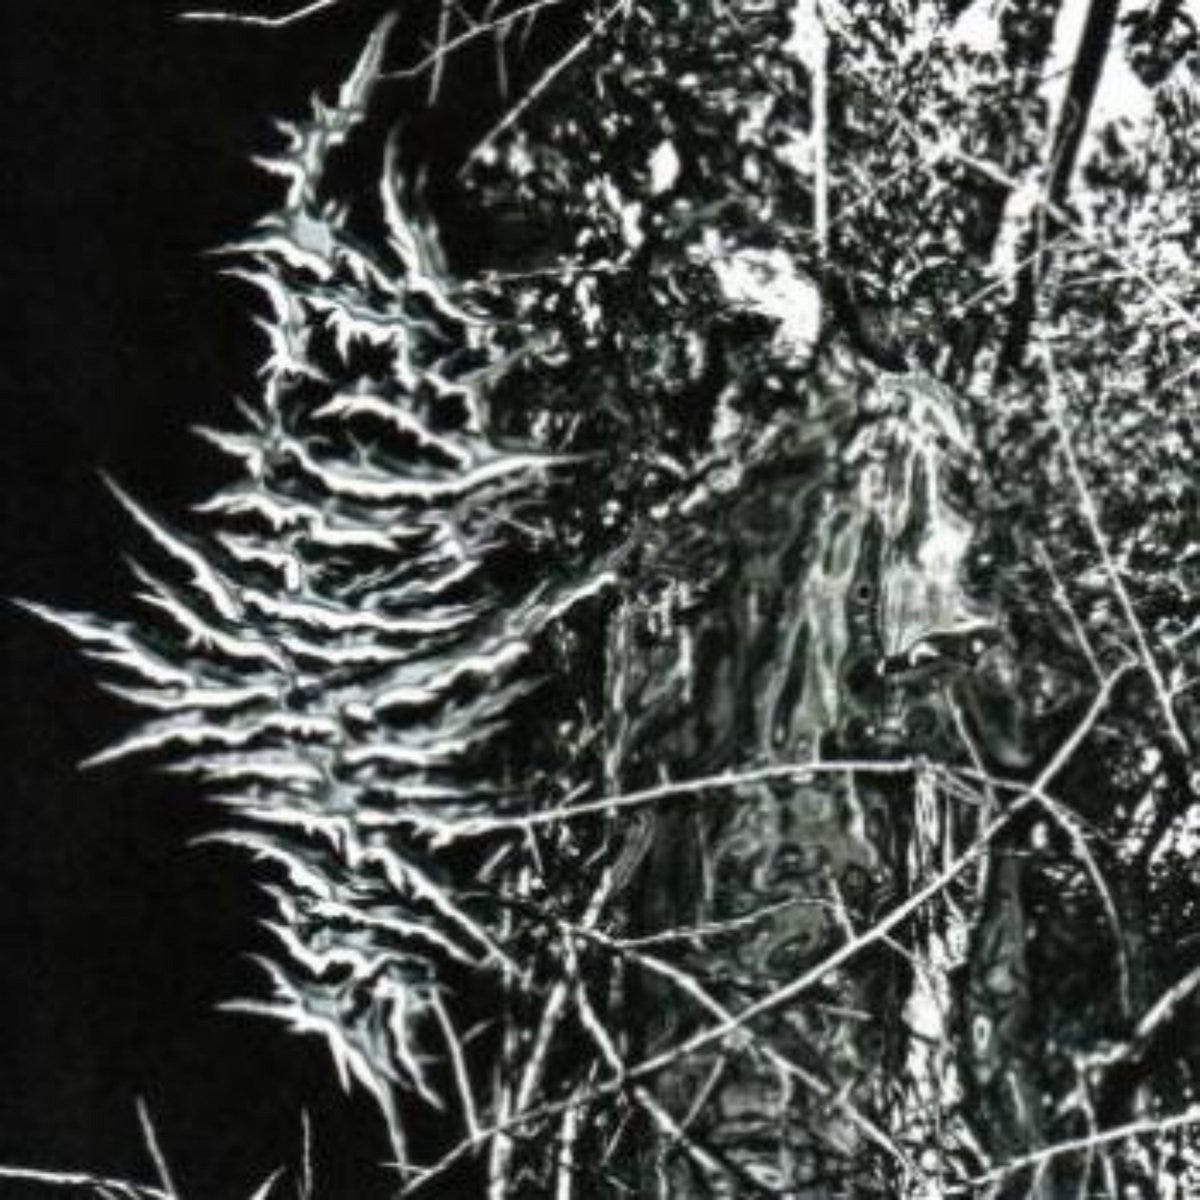 Encyclopaedia Metallum: The Metal Archives • View topic - Blindfolded and  Led to the Woods (New Zealand)